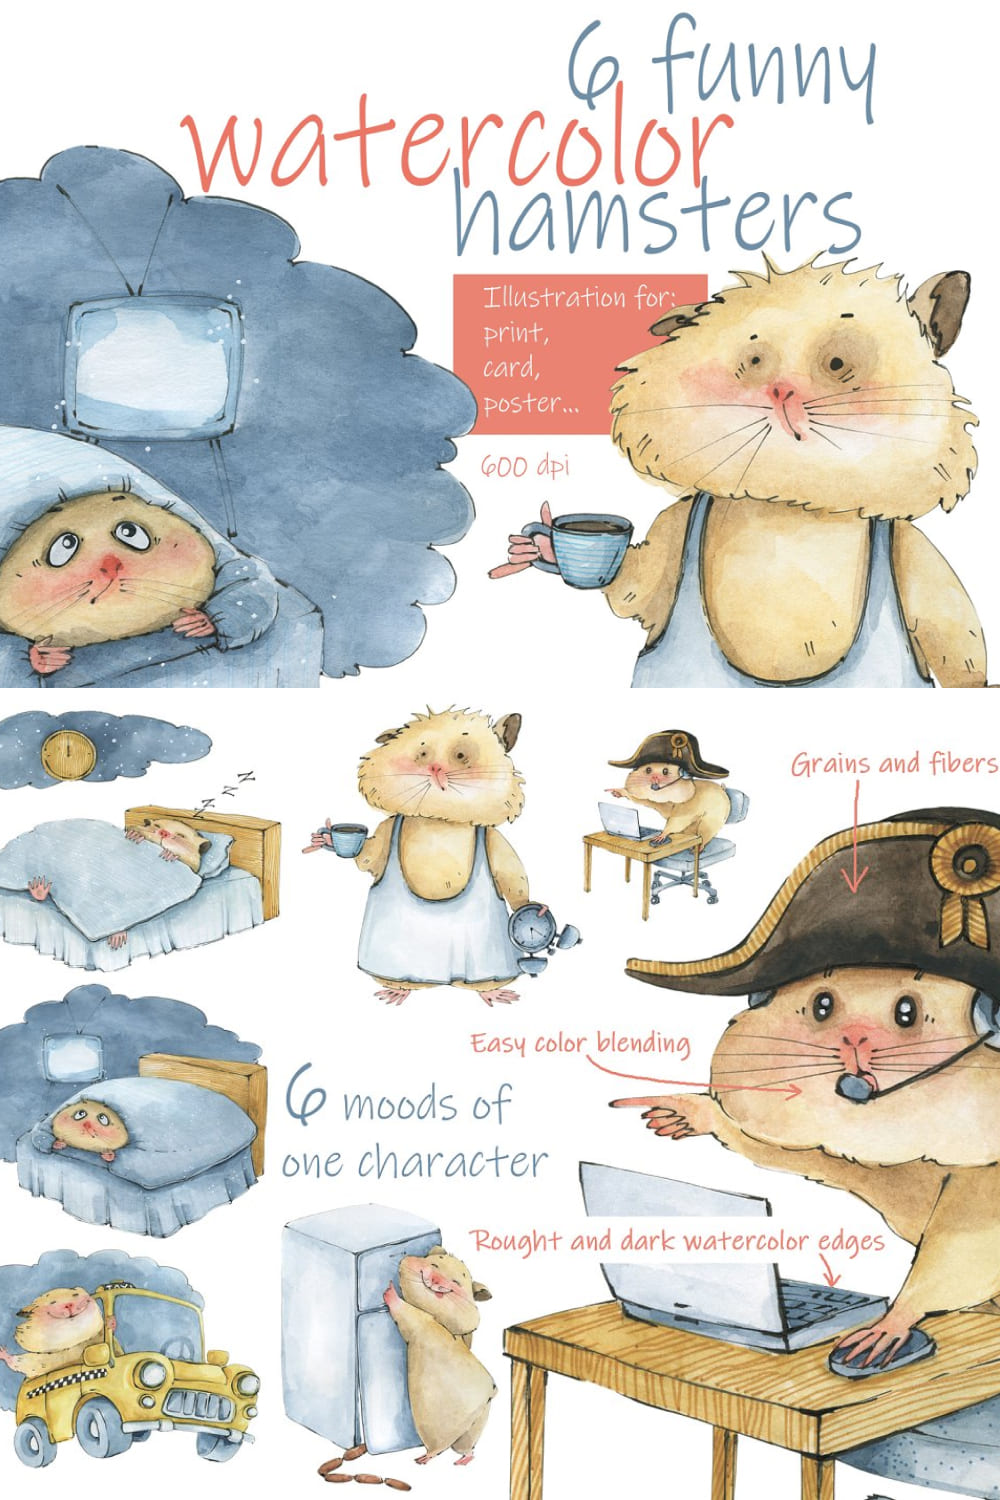 Nice pictures with pirate hamster and other variations.